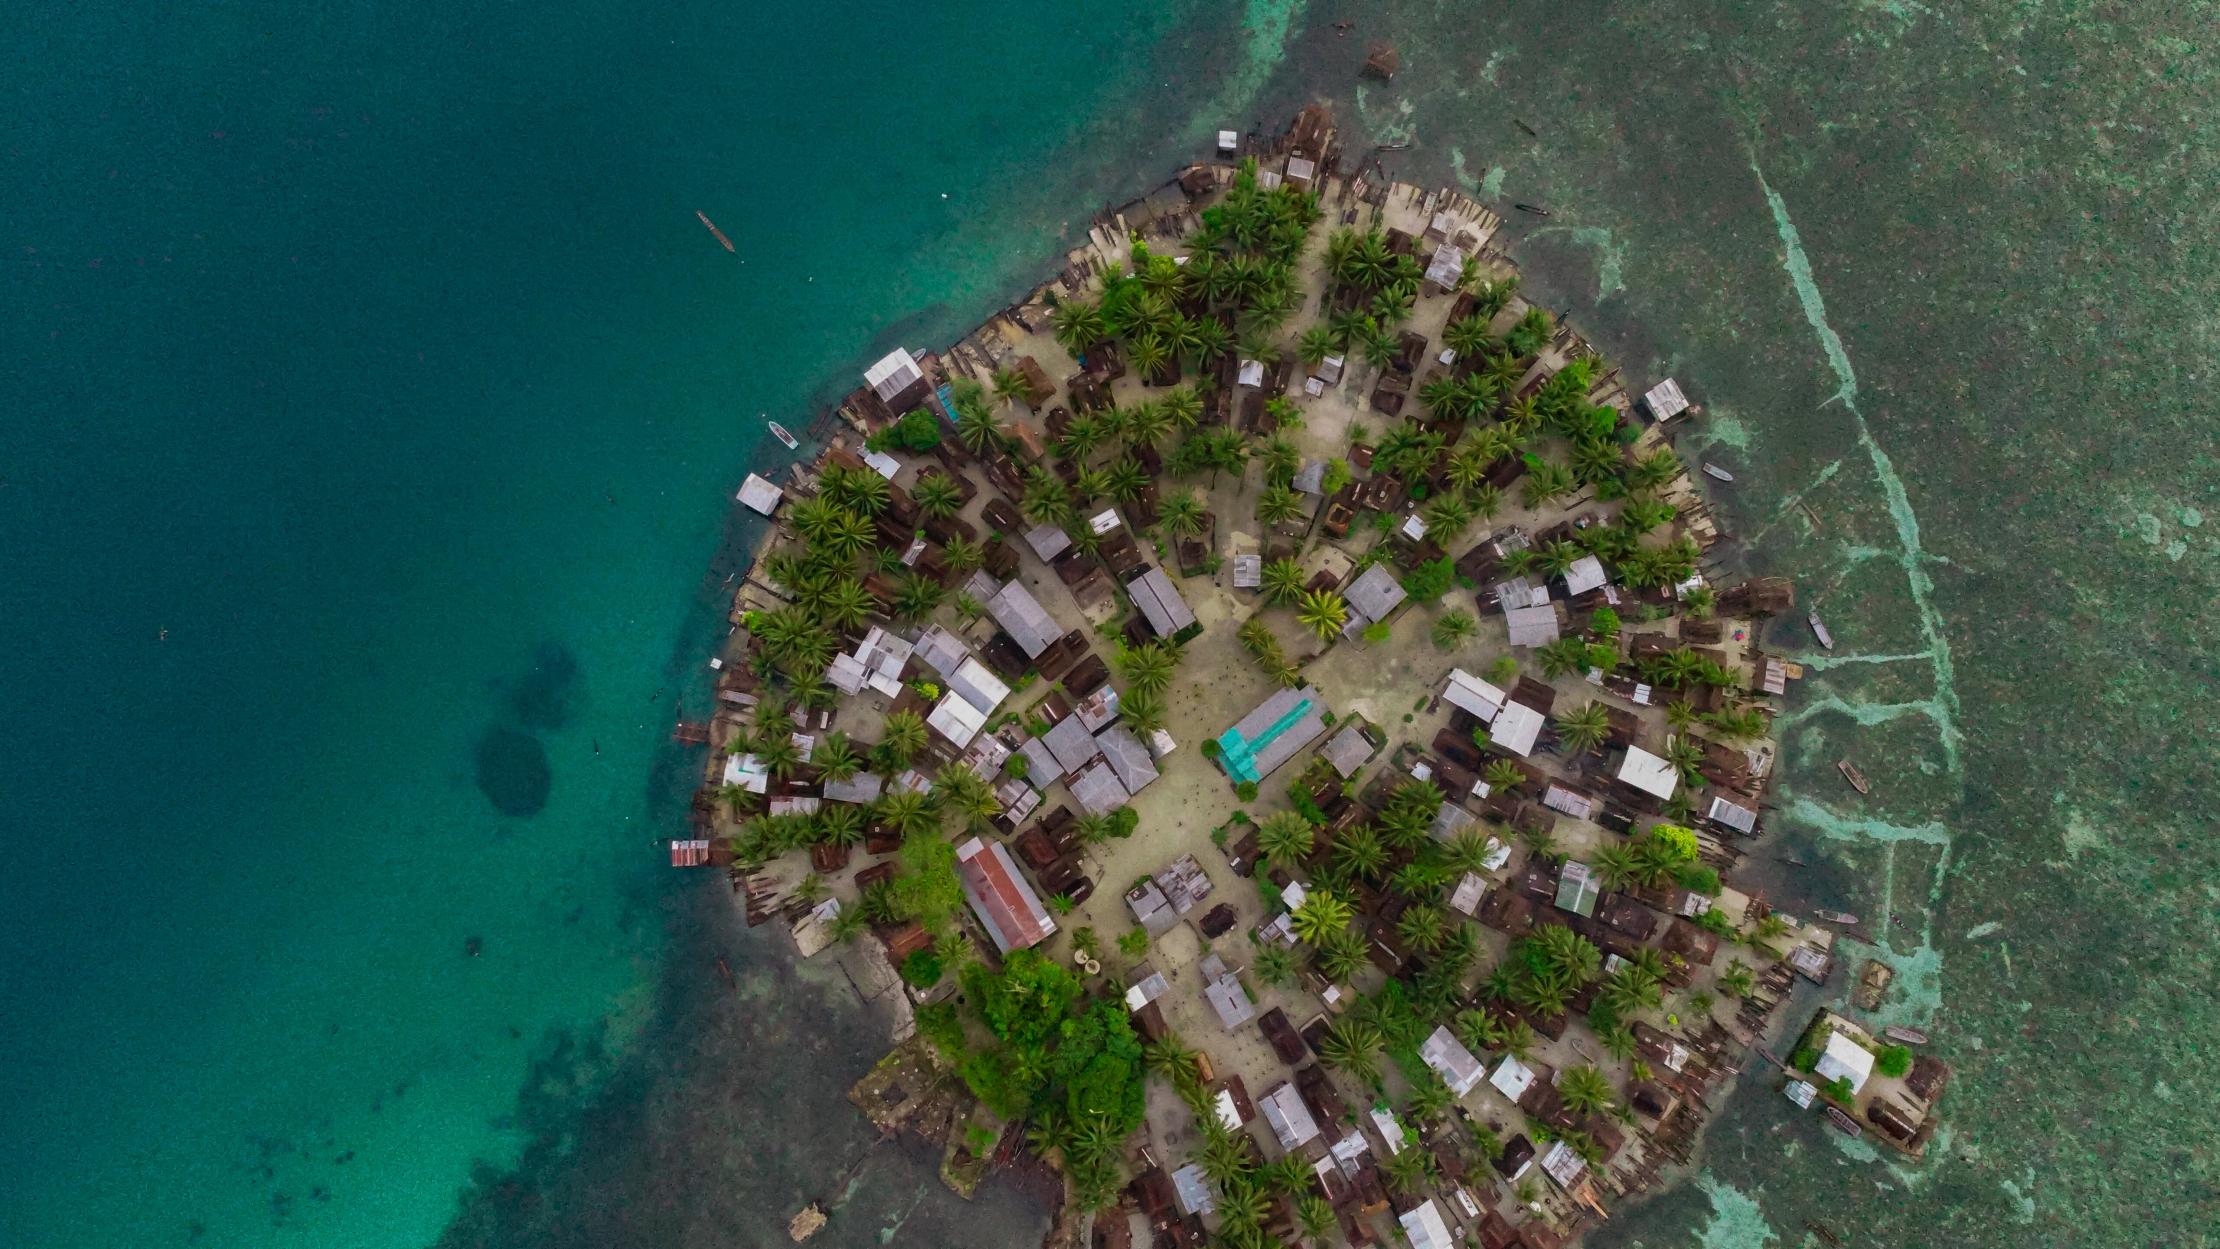 Aerial view of populated circular island with houses, surrounded by blue ocean.